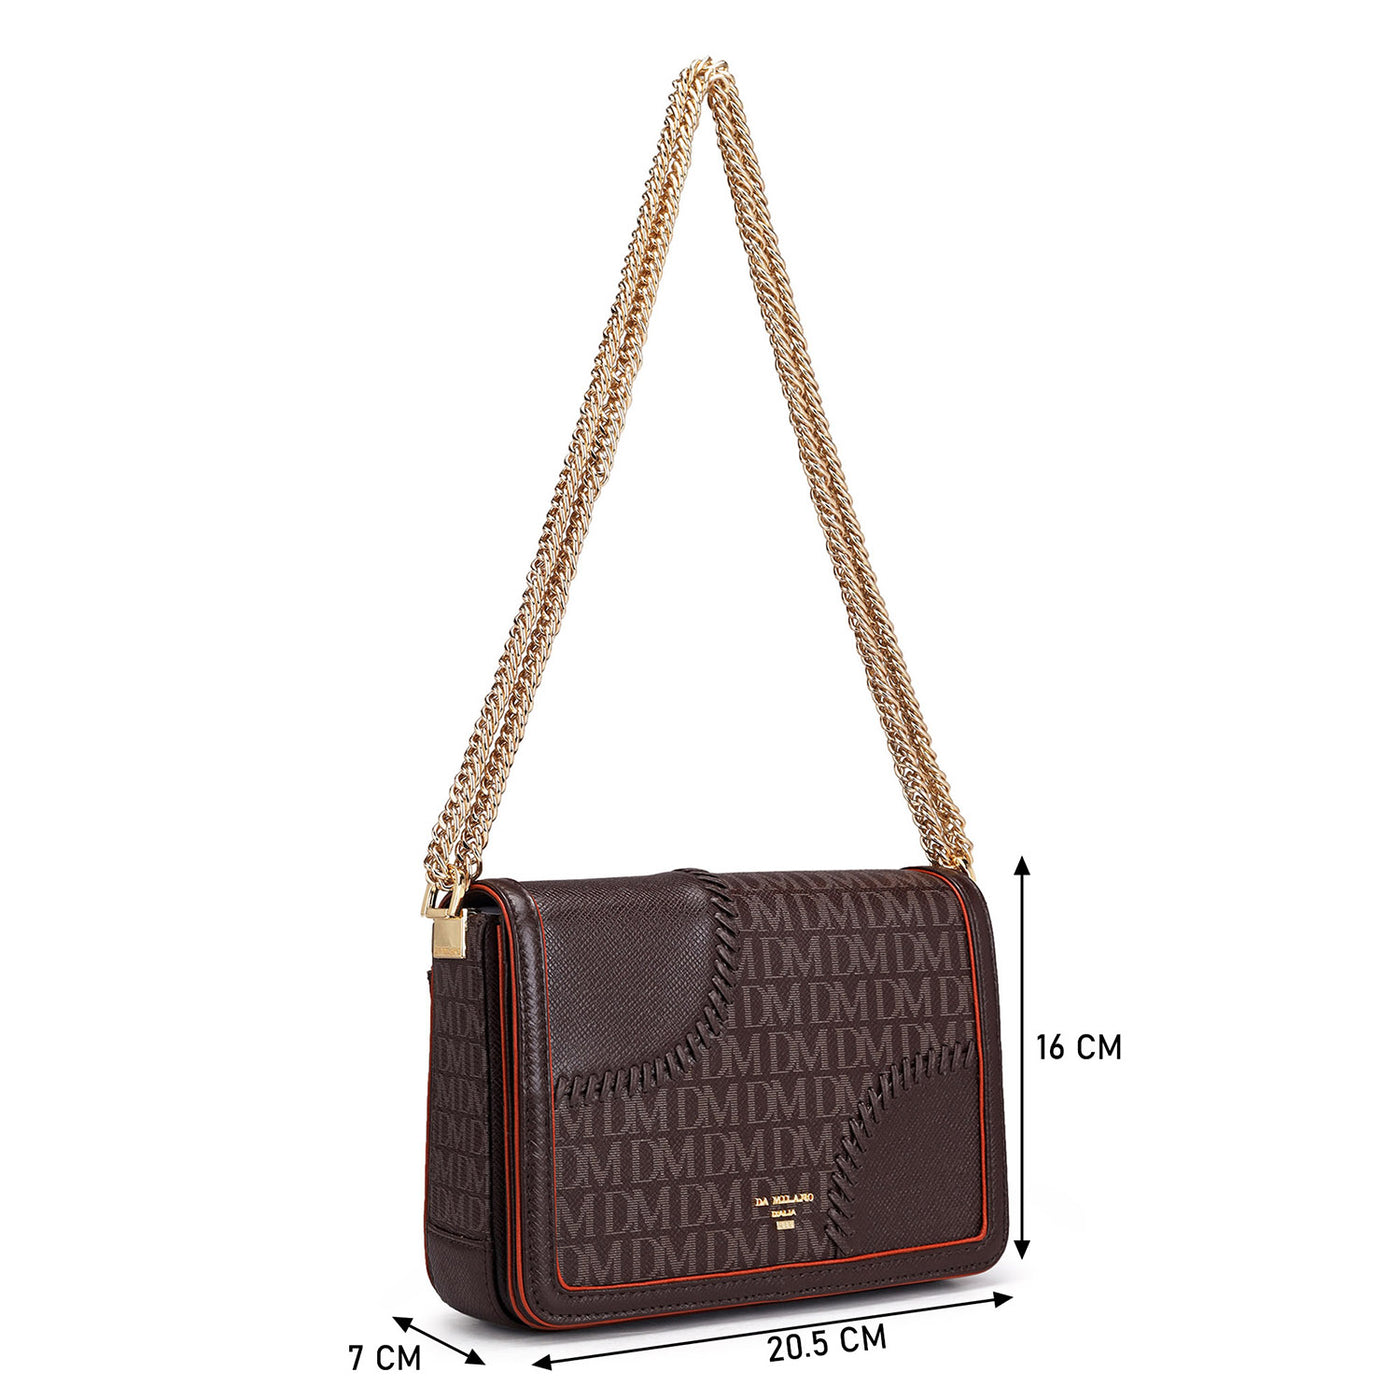 Small Monogram Franzy Leather Shoulder Bag - Chocolate